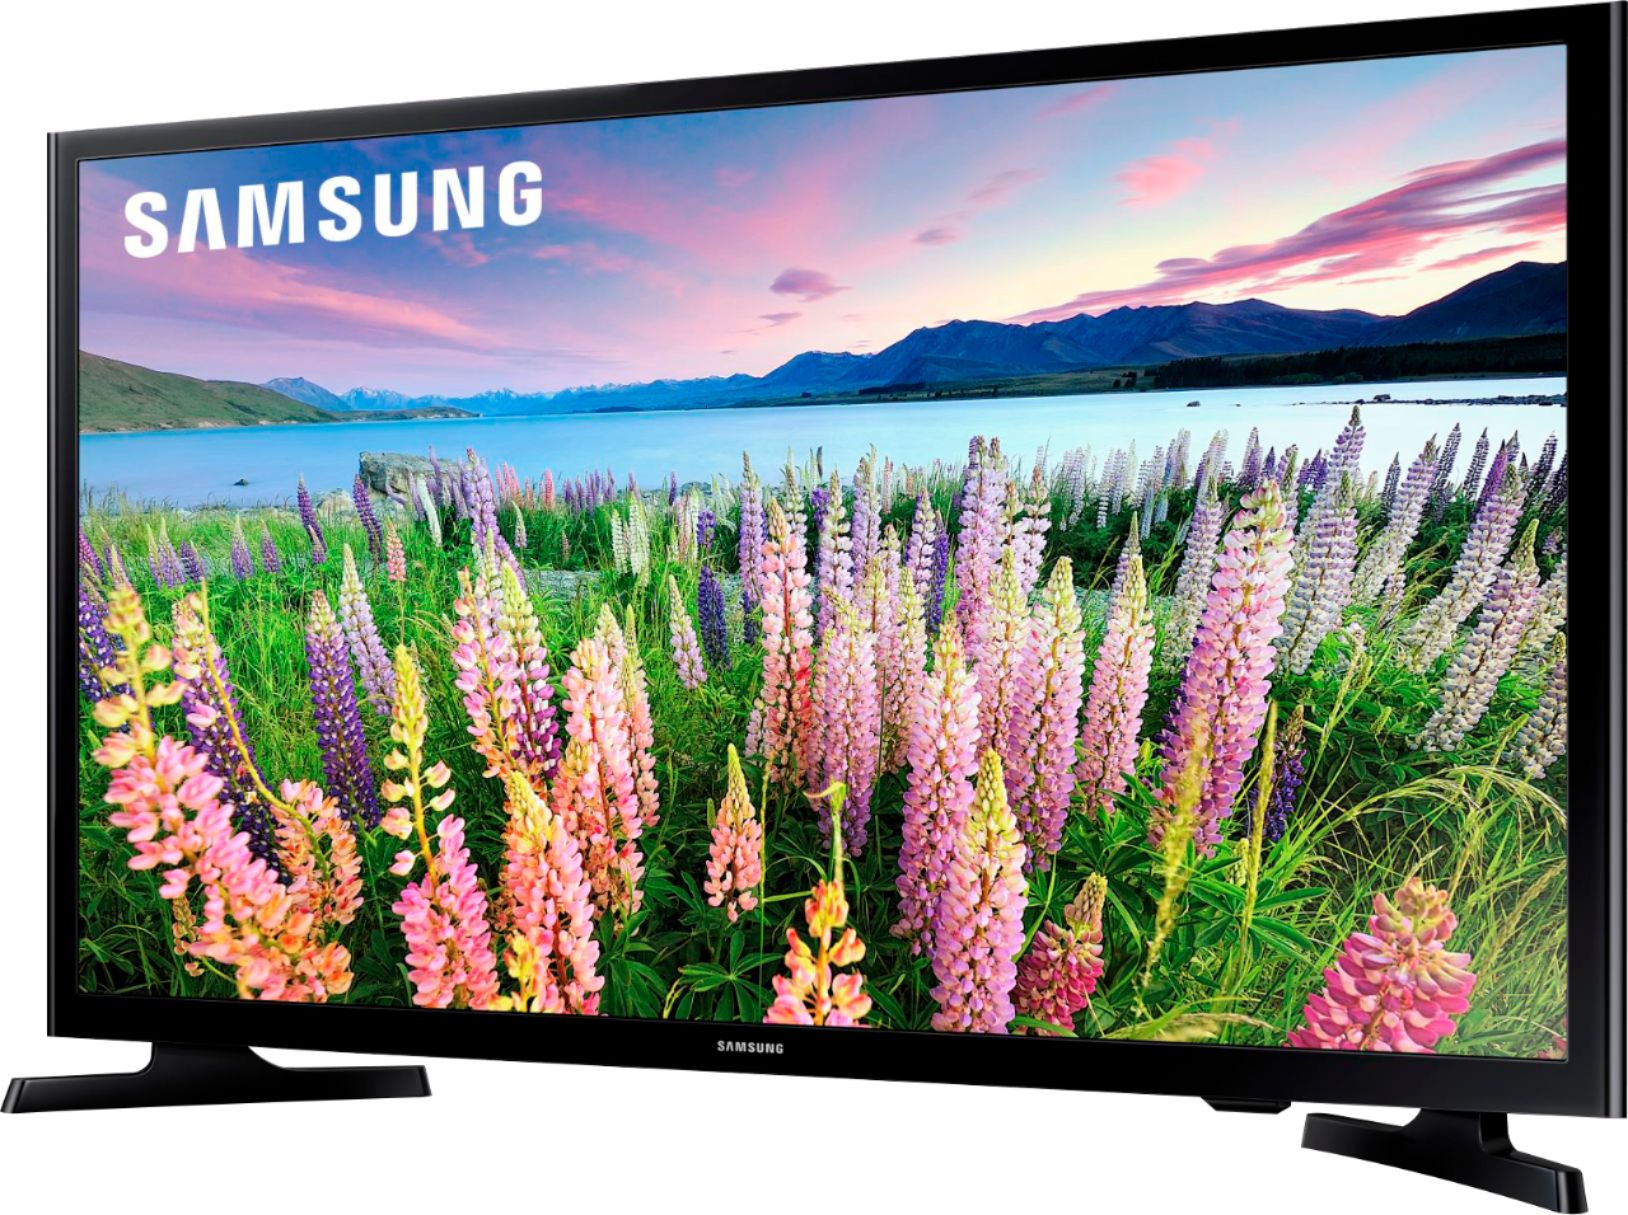 Samsung 40" Class N5200 Smart Full HD TV(Refurbished)Tv's ONLY for delivery in San Diego and Tijuana